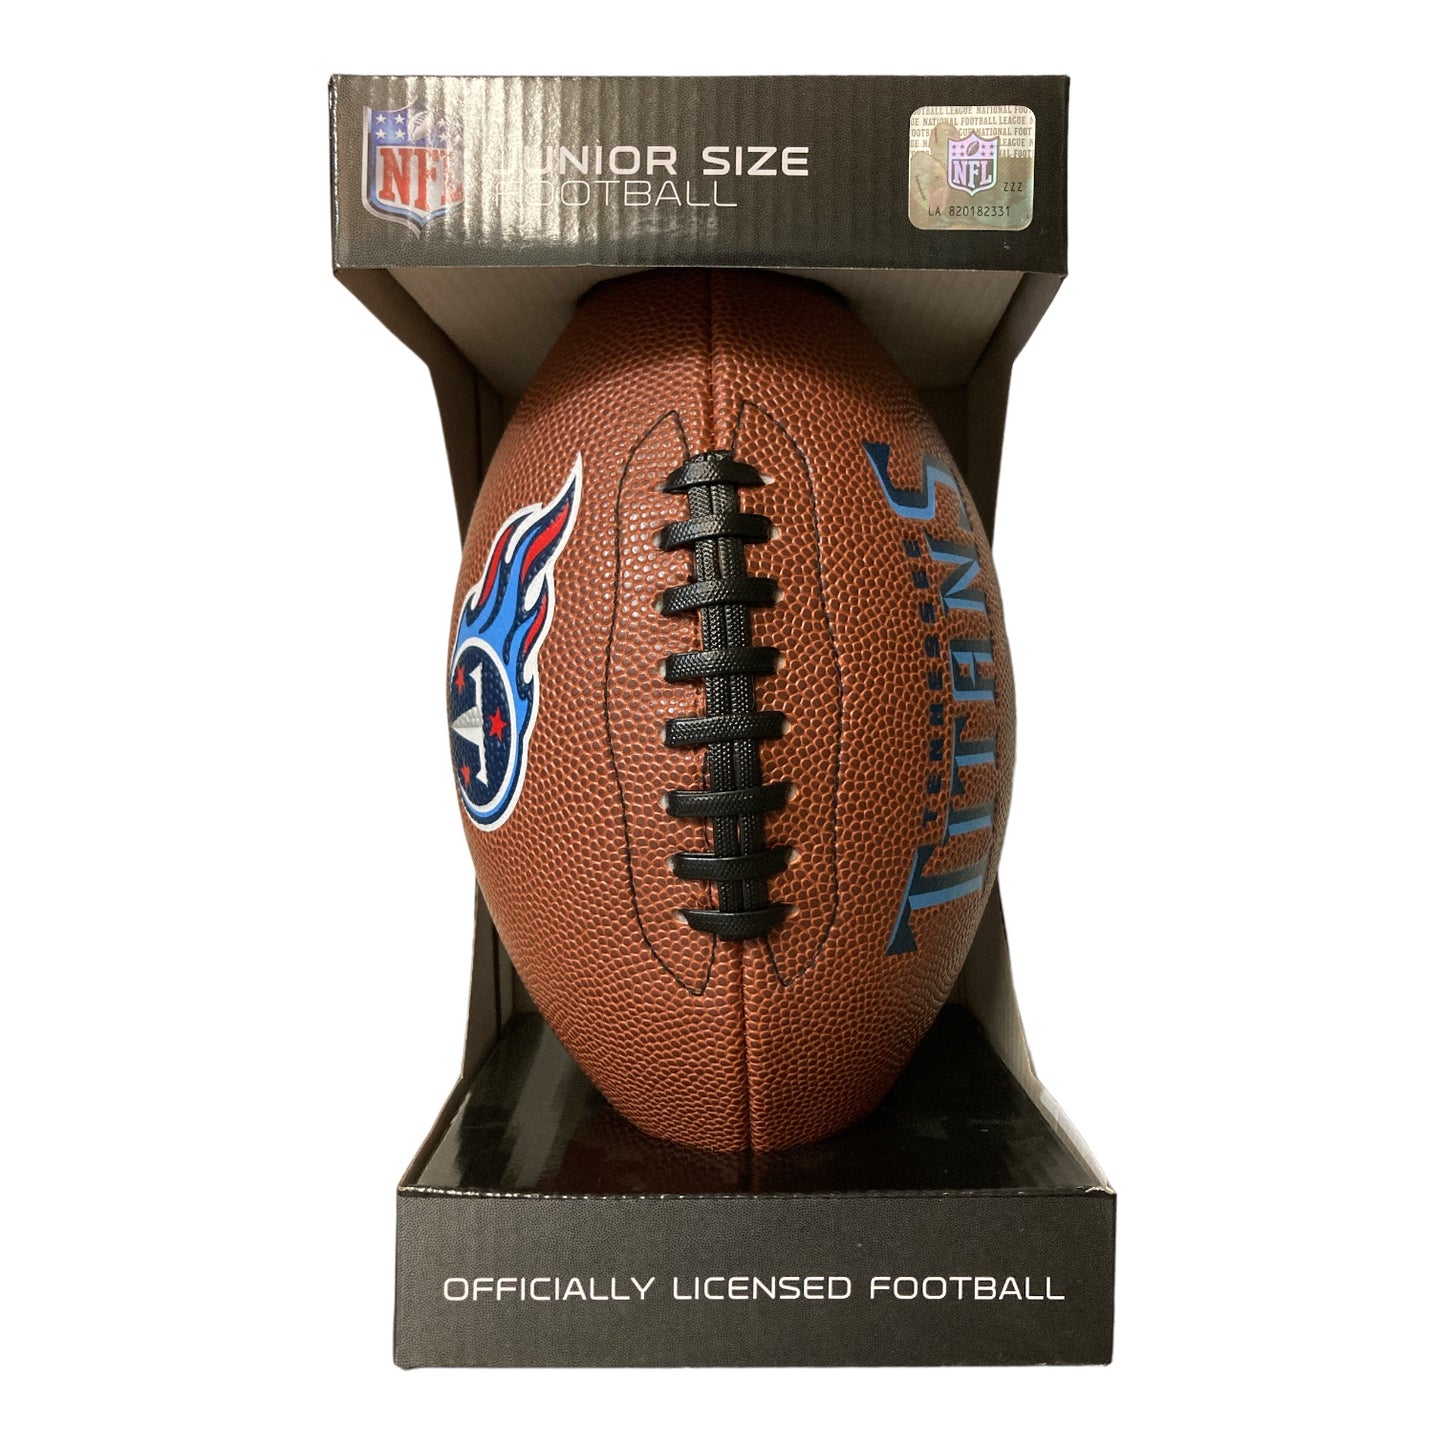 Rawlings Officially Licensed Primetime NFL Junior Football, Tennessee Titans